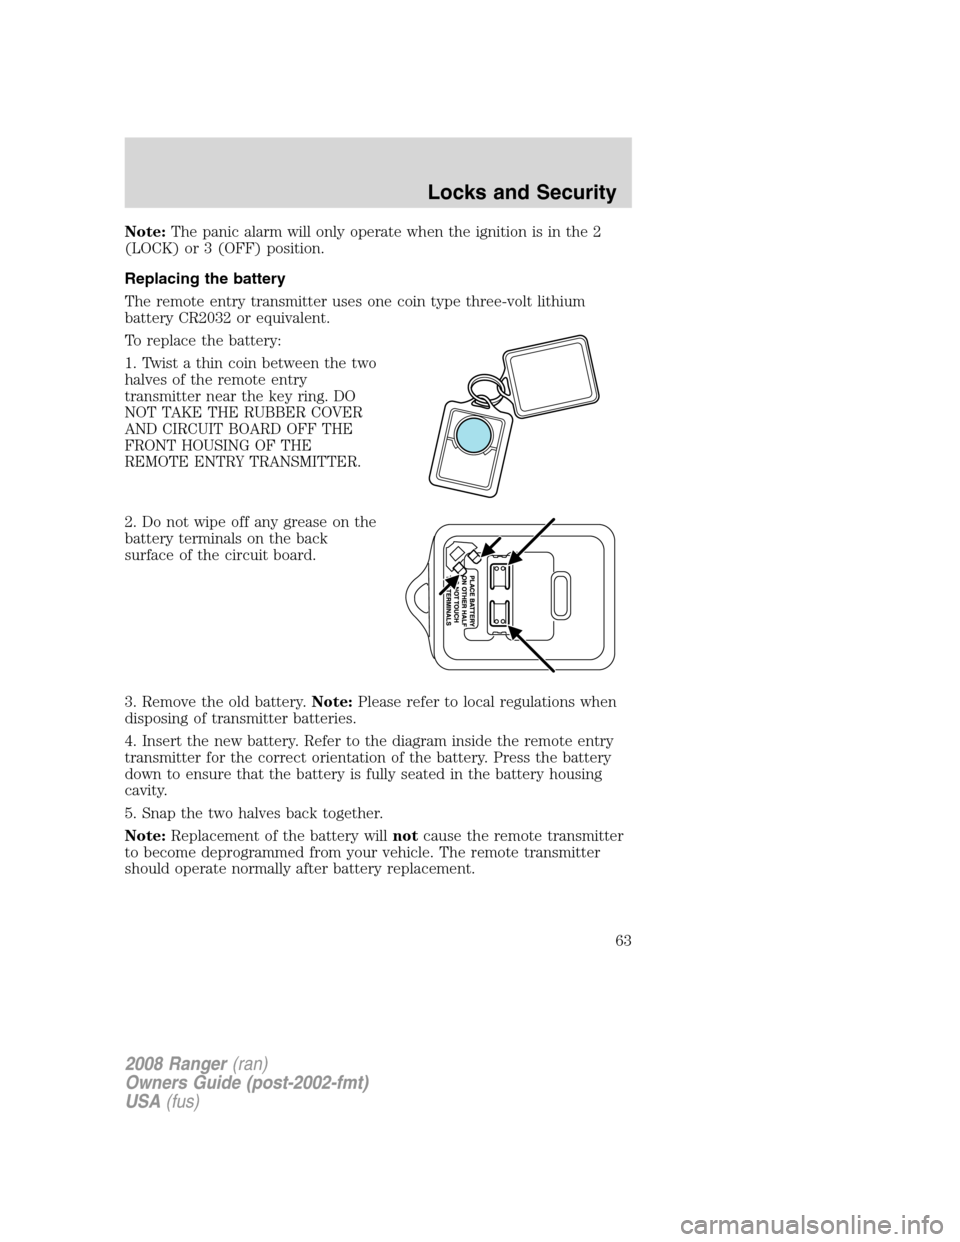 FORD RANGER 2008 2.G Owners Manual Note:The panic alarm will only operate when the ignition is in the 2
(LOCK) or 3 (OFF) position.
Replacing the battery
The remote entry transmitter uses one coin type three-volt lithium
battery CR2032